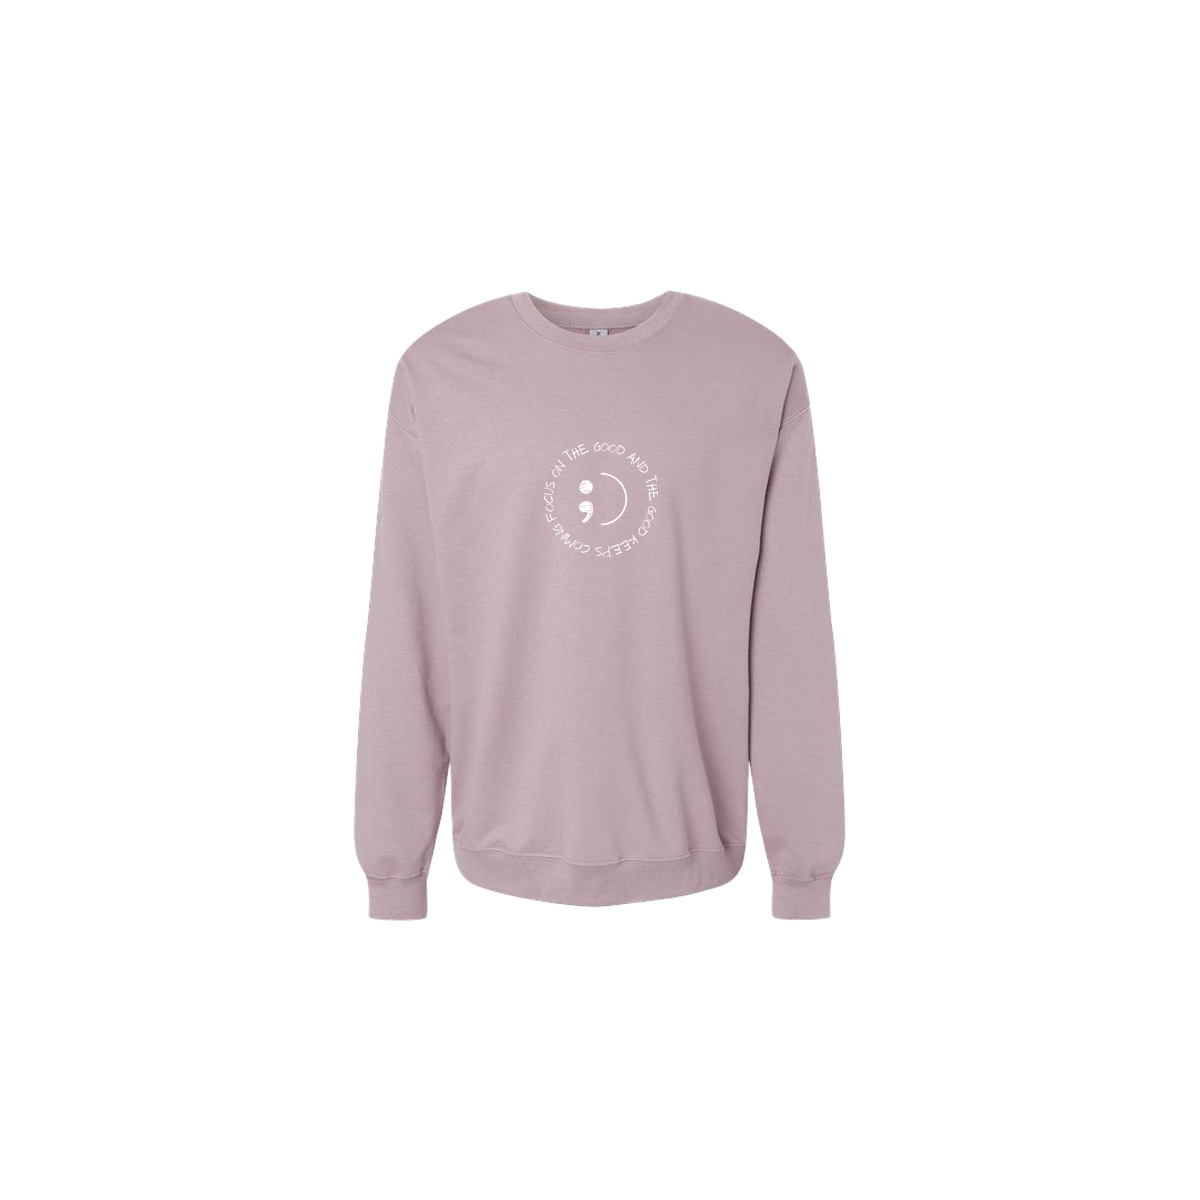 Focus on The Good And The Good Keeps Coming Embroidered Mauve Crewneck - Mental Health Awareness Clothing